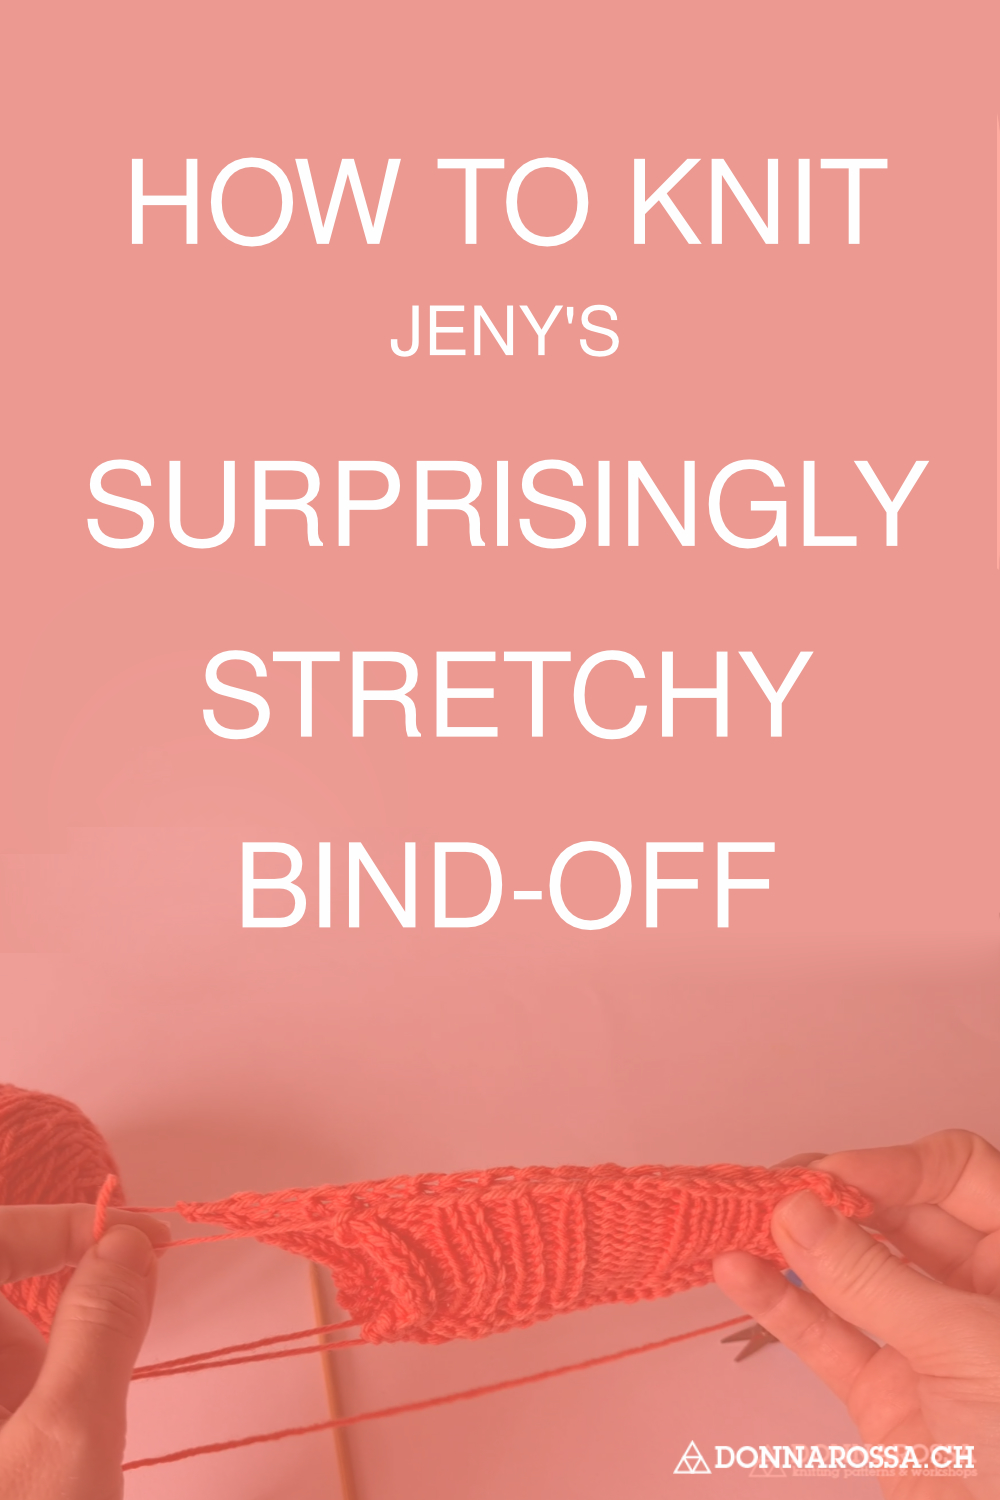 How to knit Jeny's suprisingly stretchy bind-off